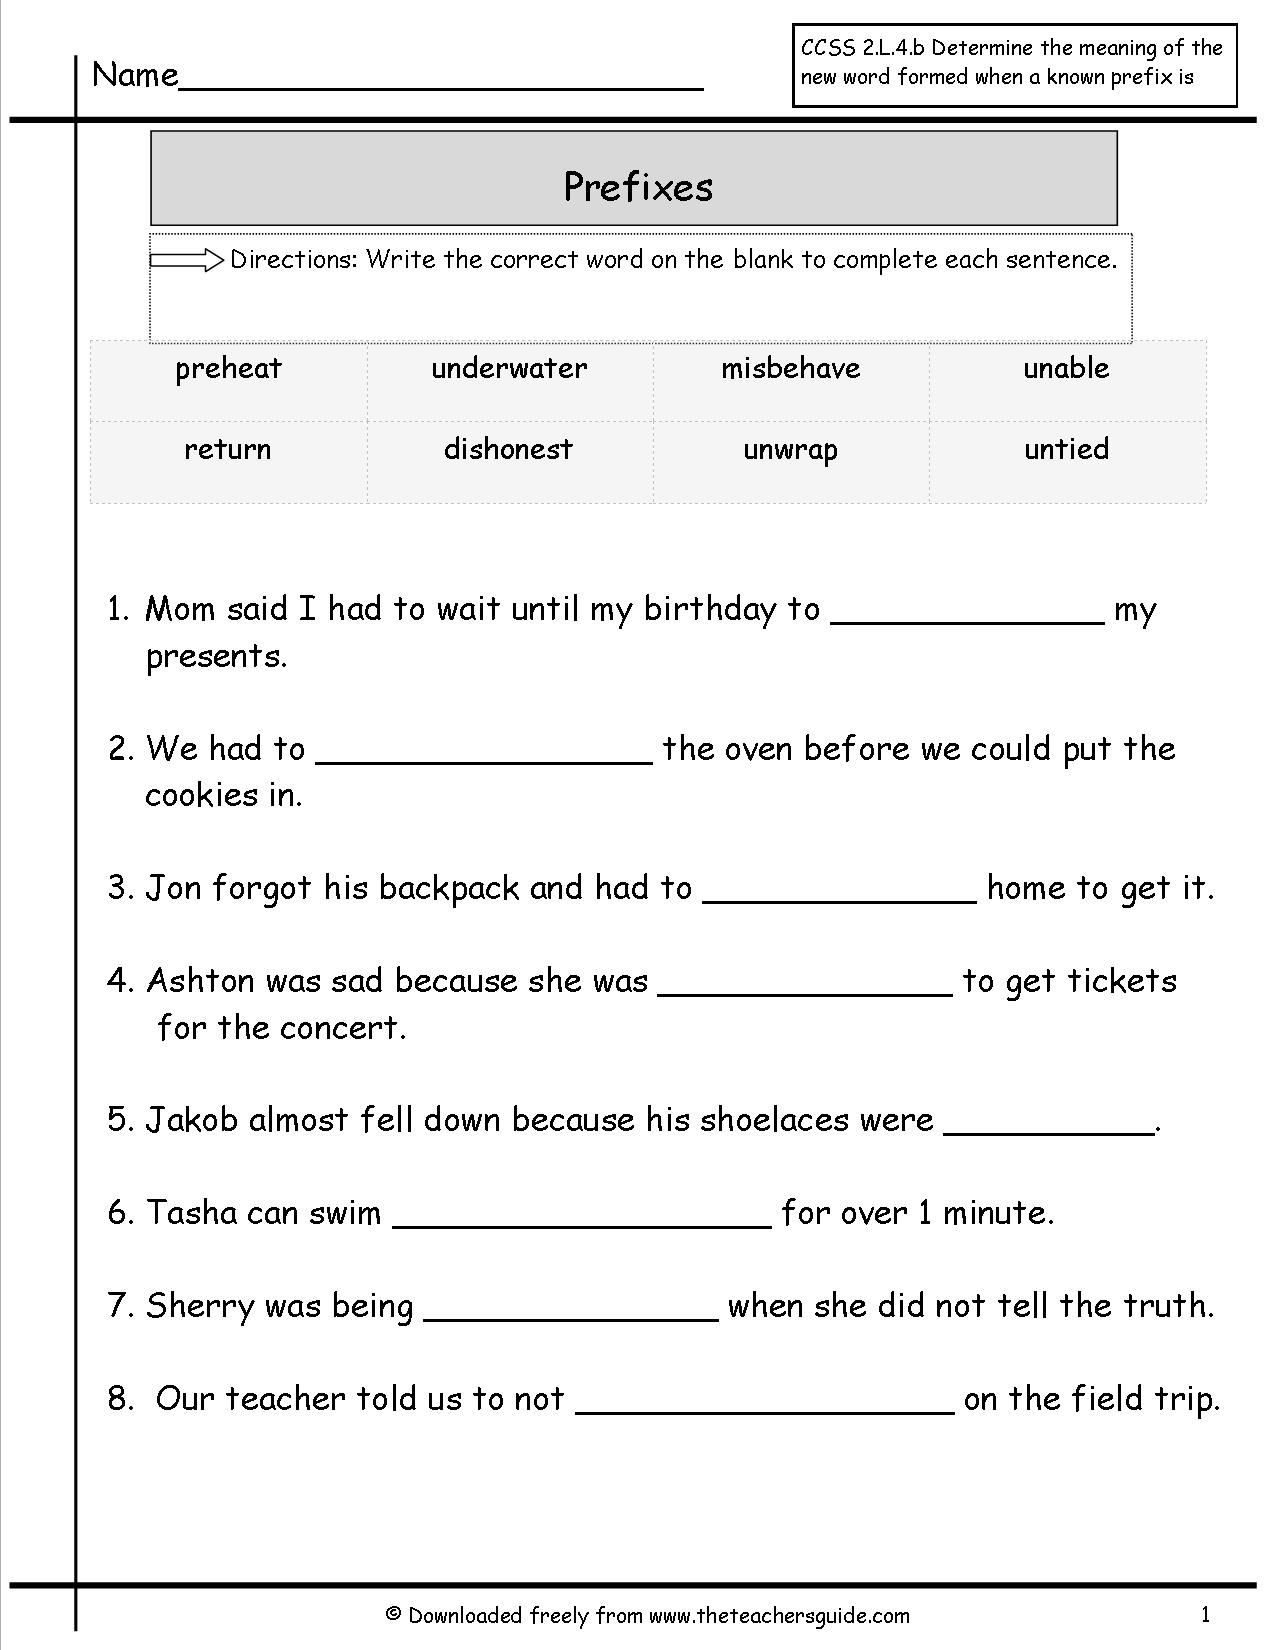 Root Words Worksheet 5th Grade Prefixes and Suffixes Worksheets Look at This One Next Week